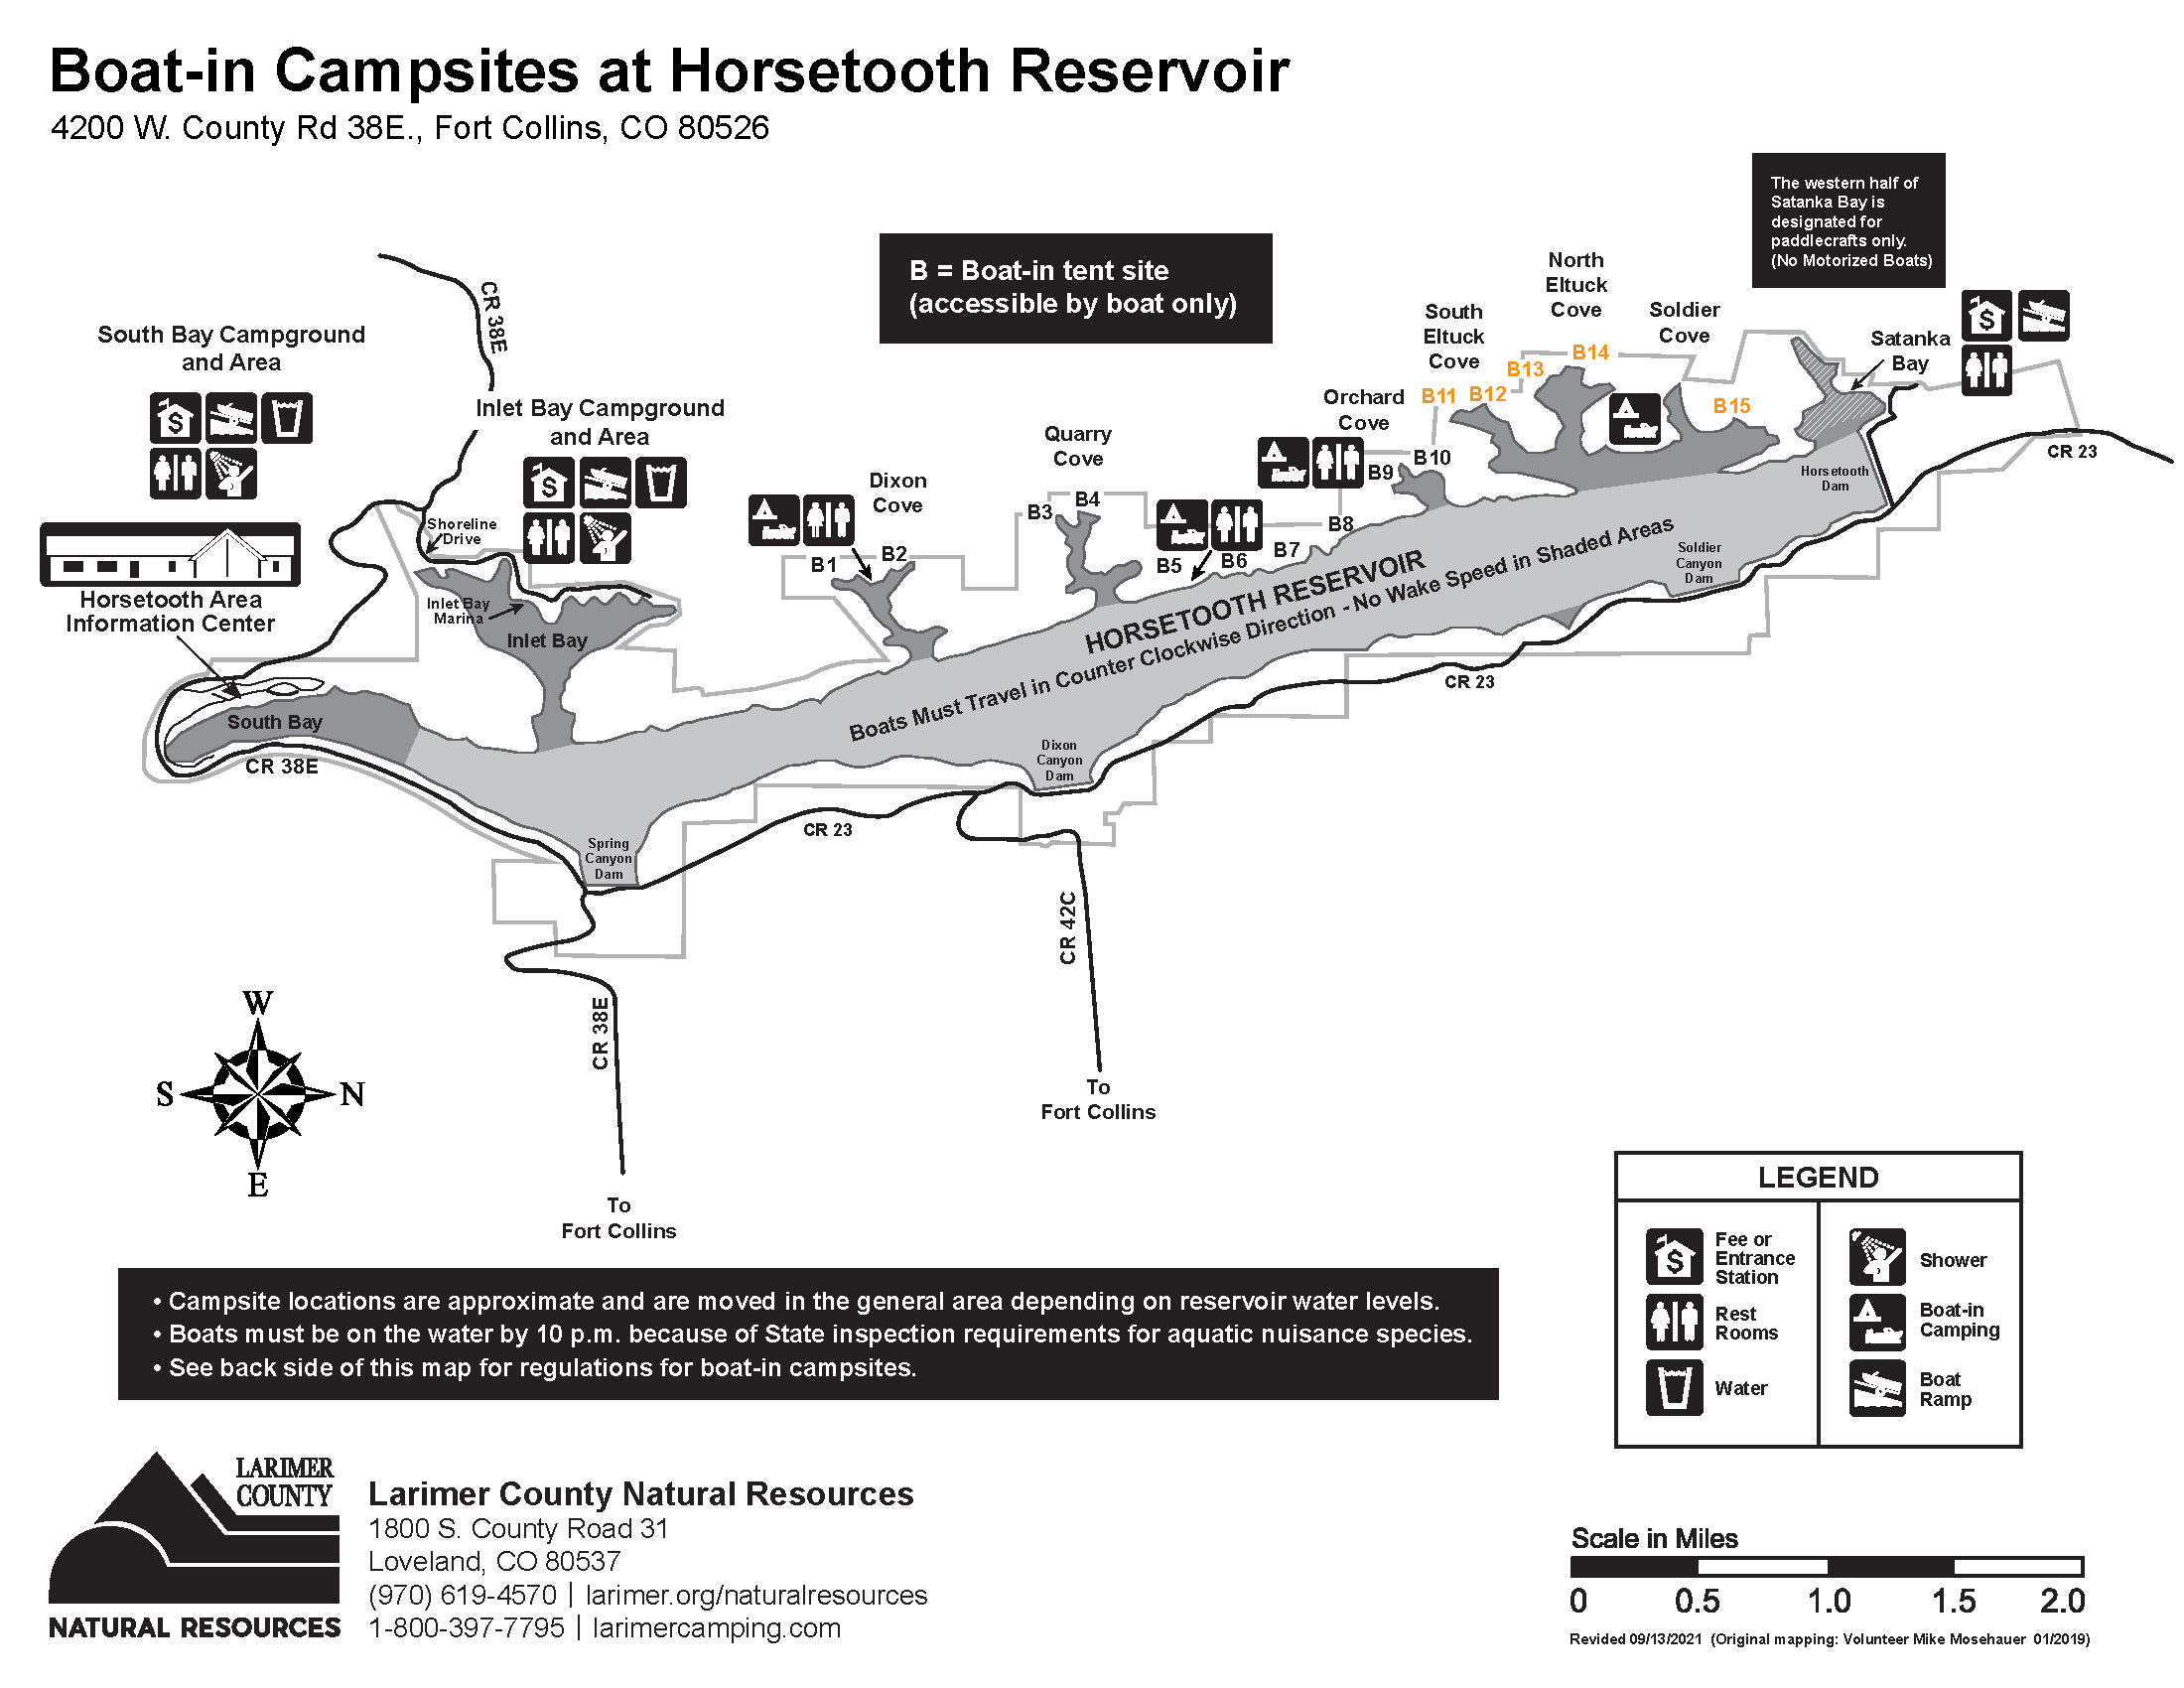 Image 1: Horsetooth Reservoir Boat-in Campsite Map